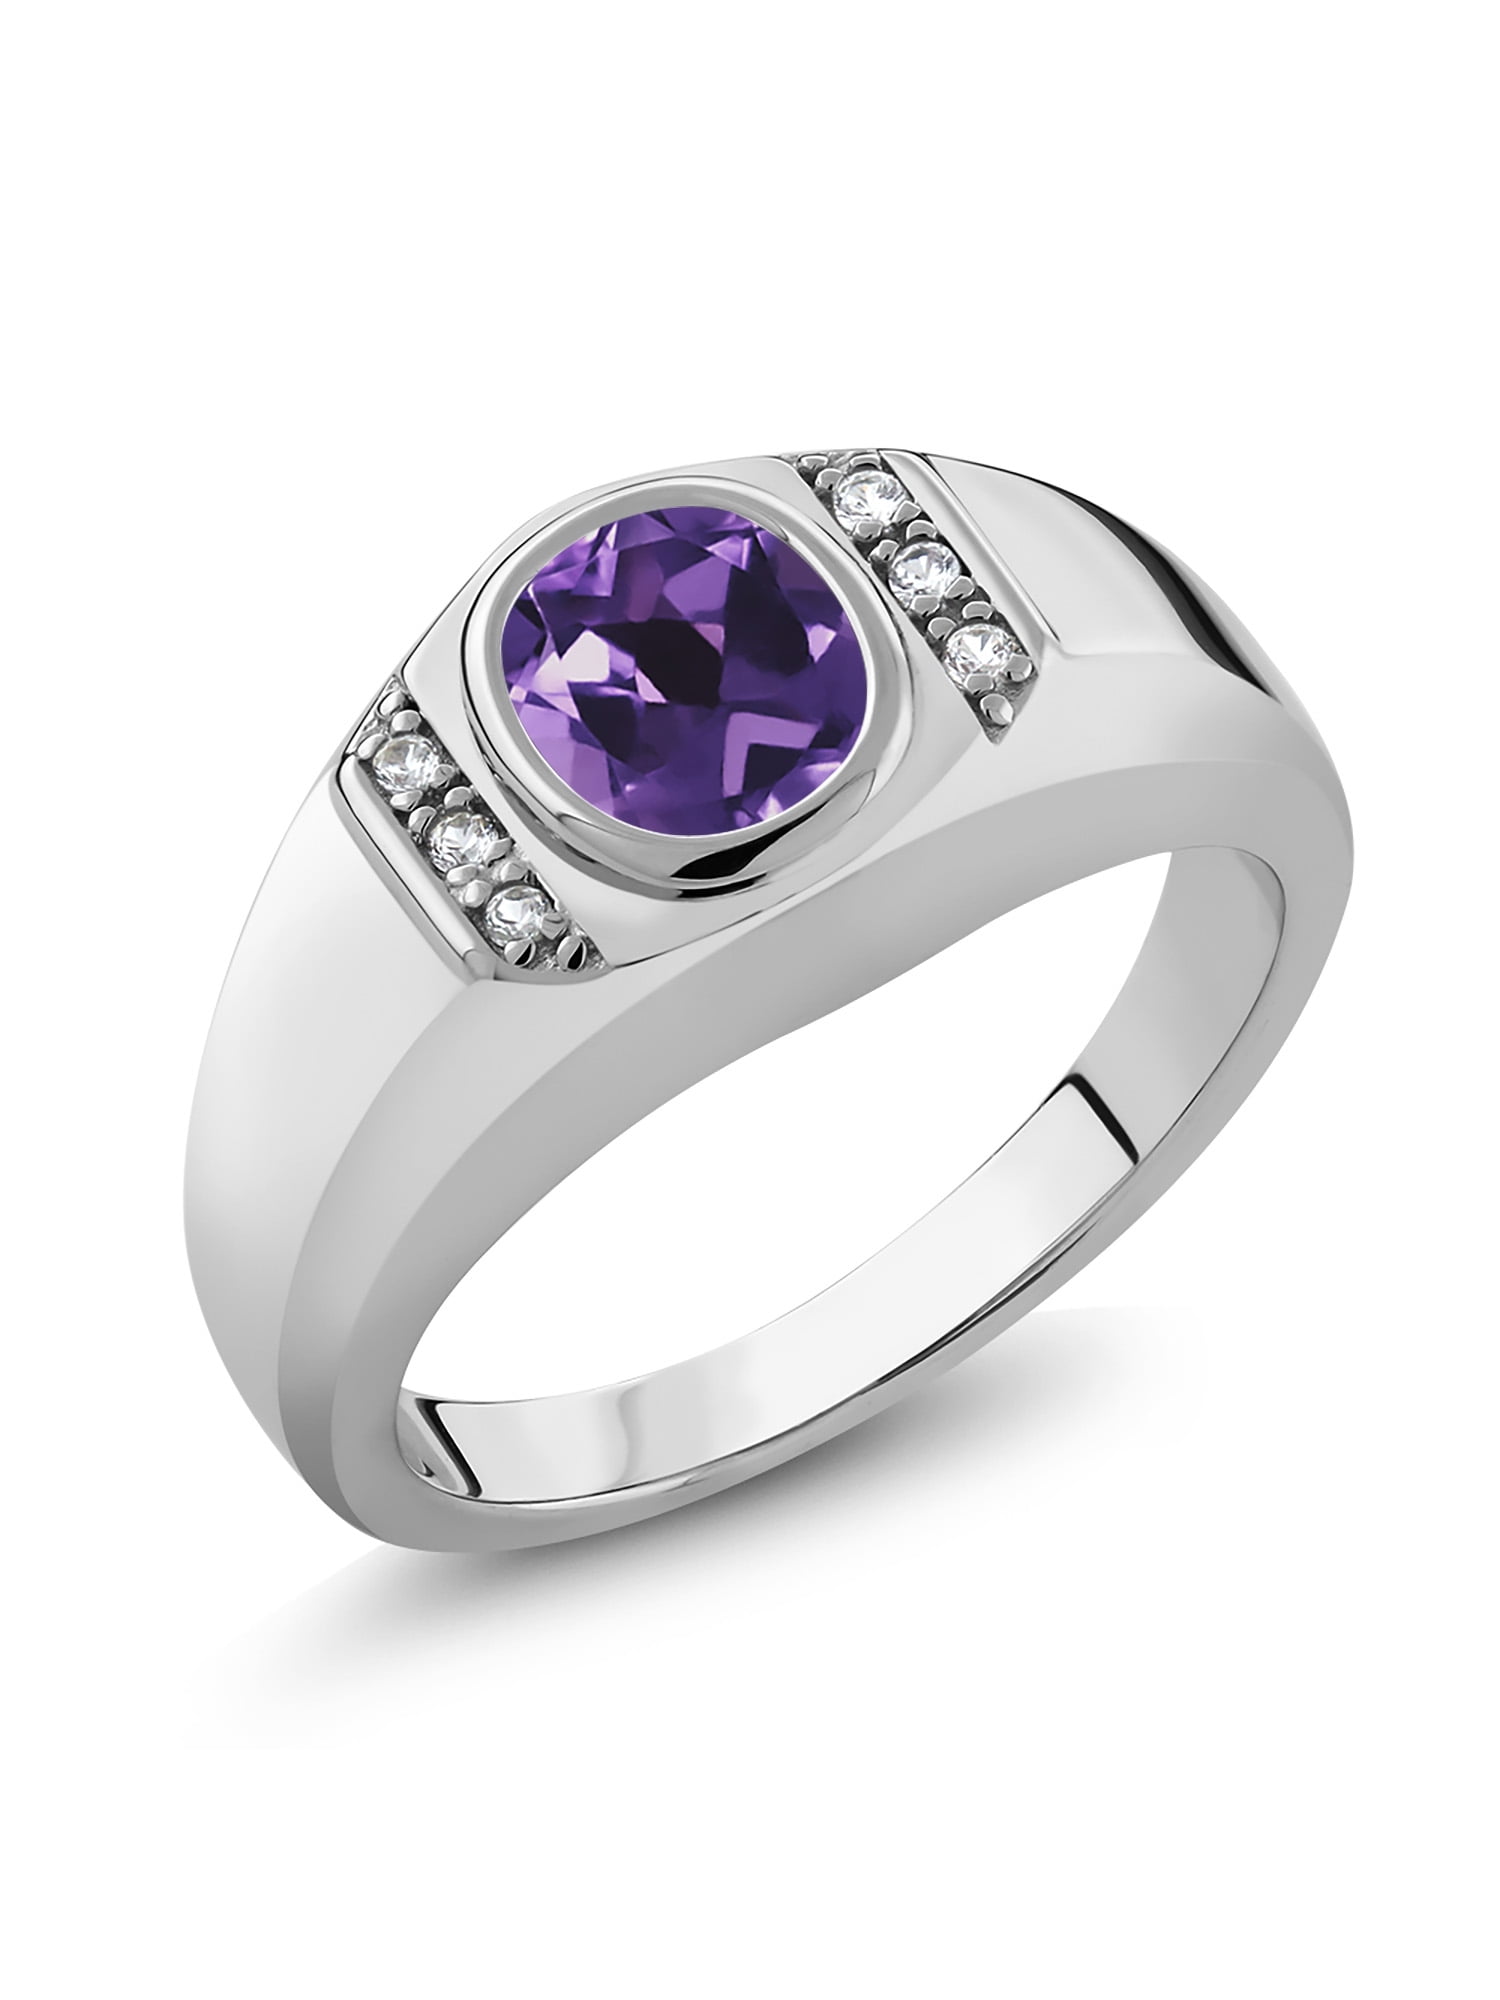 Gem Stone King Men's 925 Sterling Silver Purple Amethyst and White Created Sapphire Ring (1.06 Ct Oval, Available in Size 7, 8, 9, 10, 11, 12, 13)